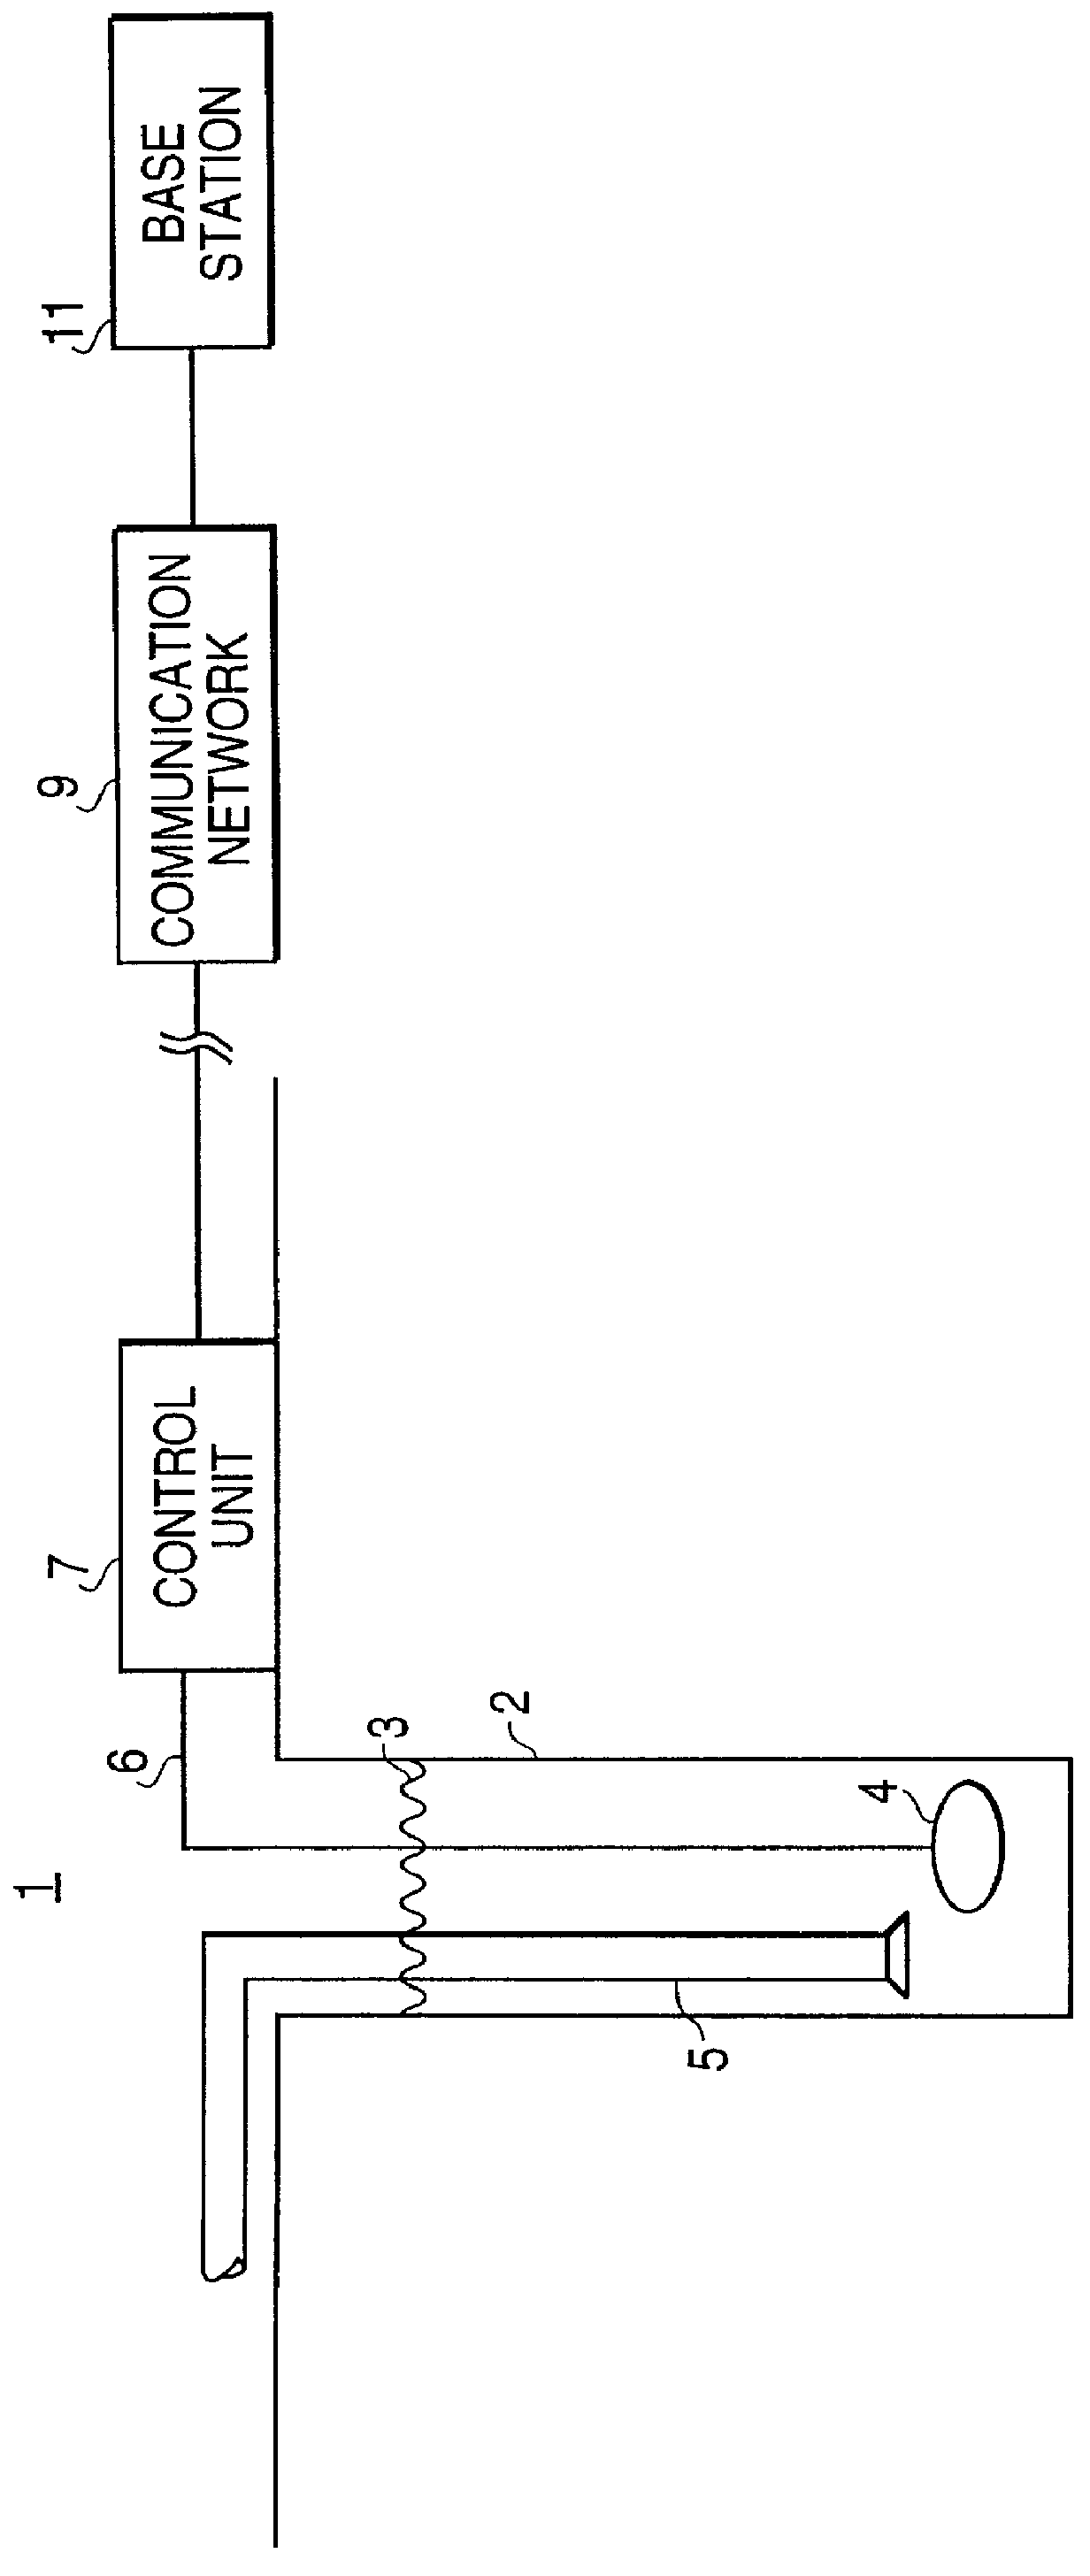 Automated groundwater monitoring system and method